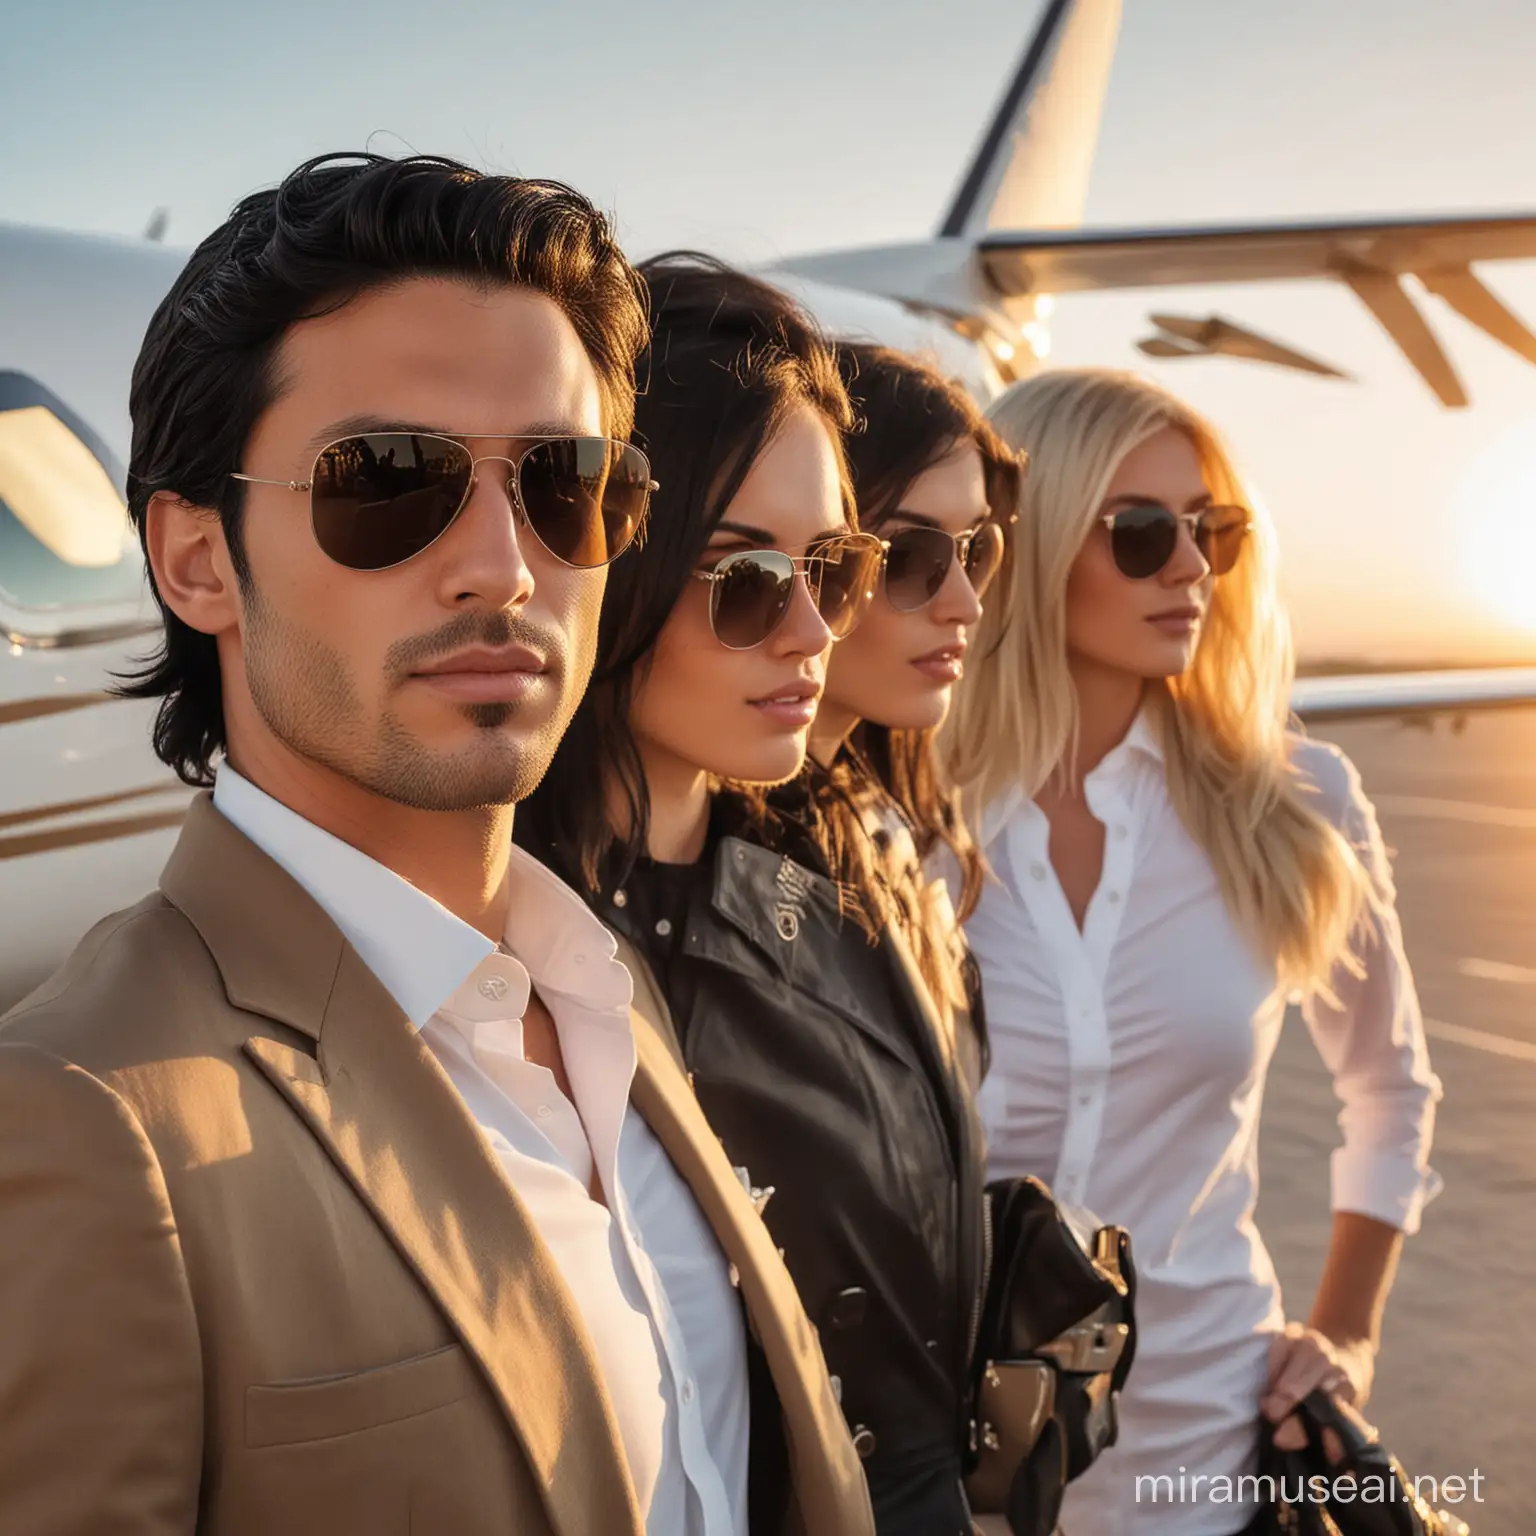 Sleek Man in Sunglasses with Blondes on Opulent Private Jet at Dusk